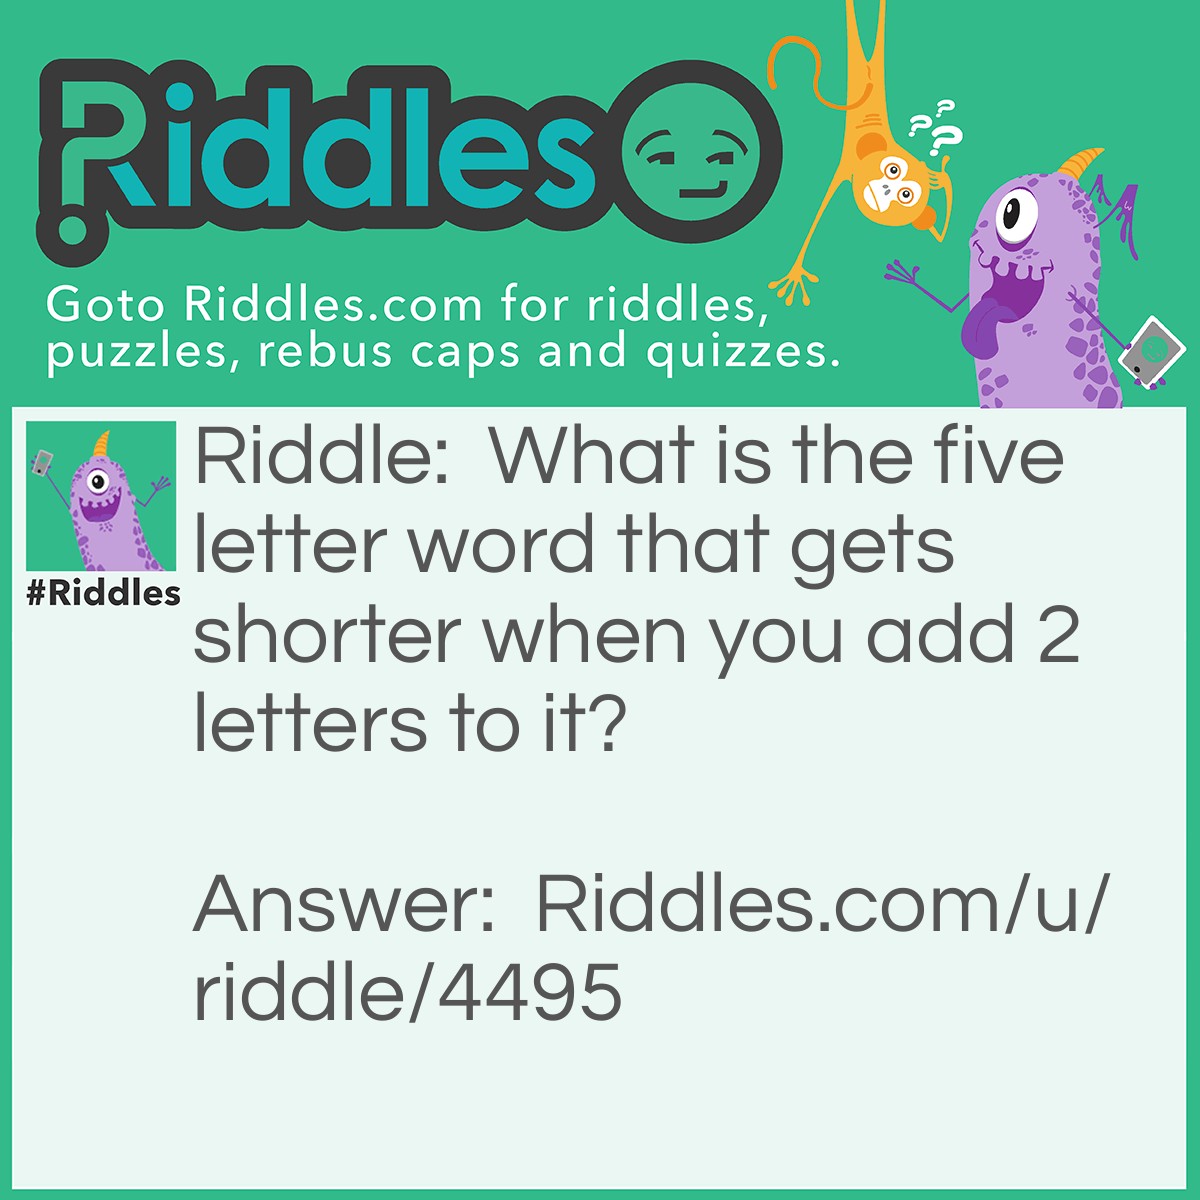 Riddle: What is the five letter word that gets shorter when you add 2 letters to it? Answer: The word is 'short'.